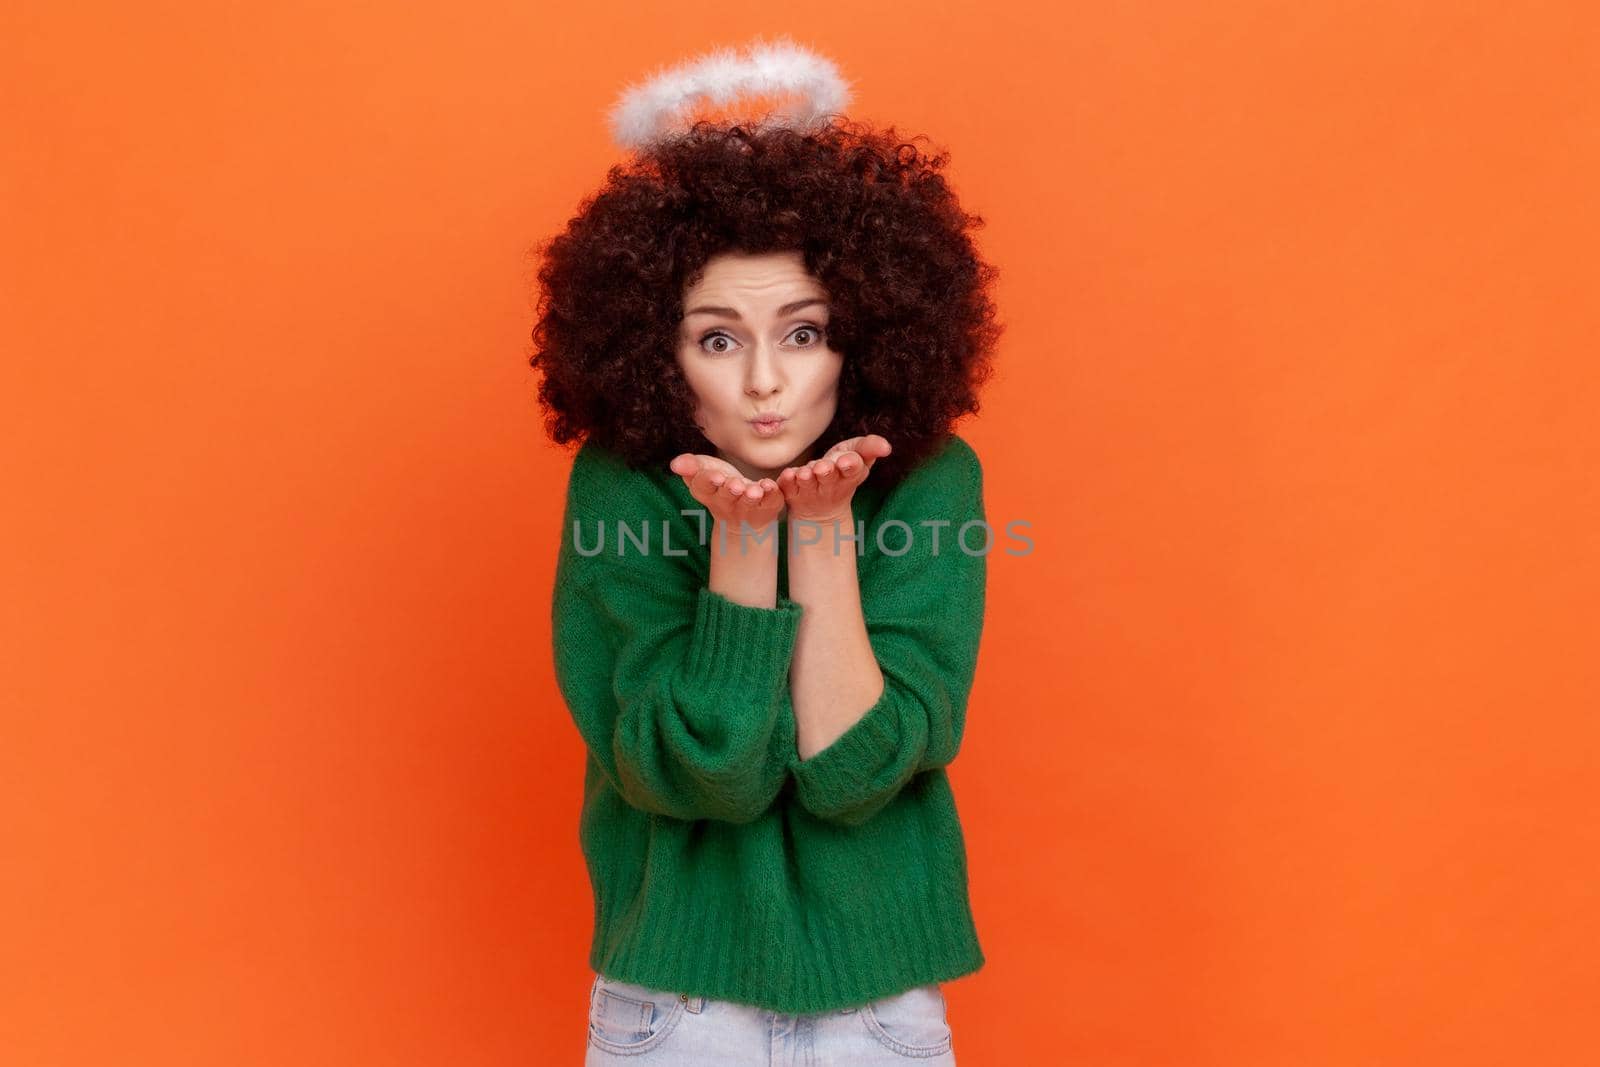 Angelic woman with Afro hairstyle wearing green casual style sweater and nimbus over head sending air kisses, expressing love and romance. by Khosro1